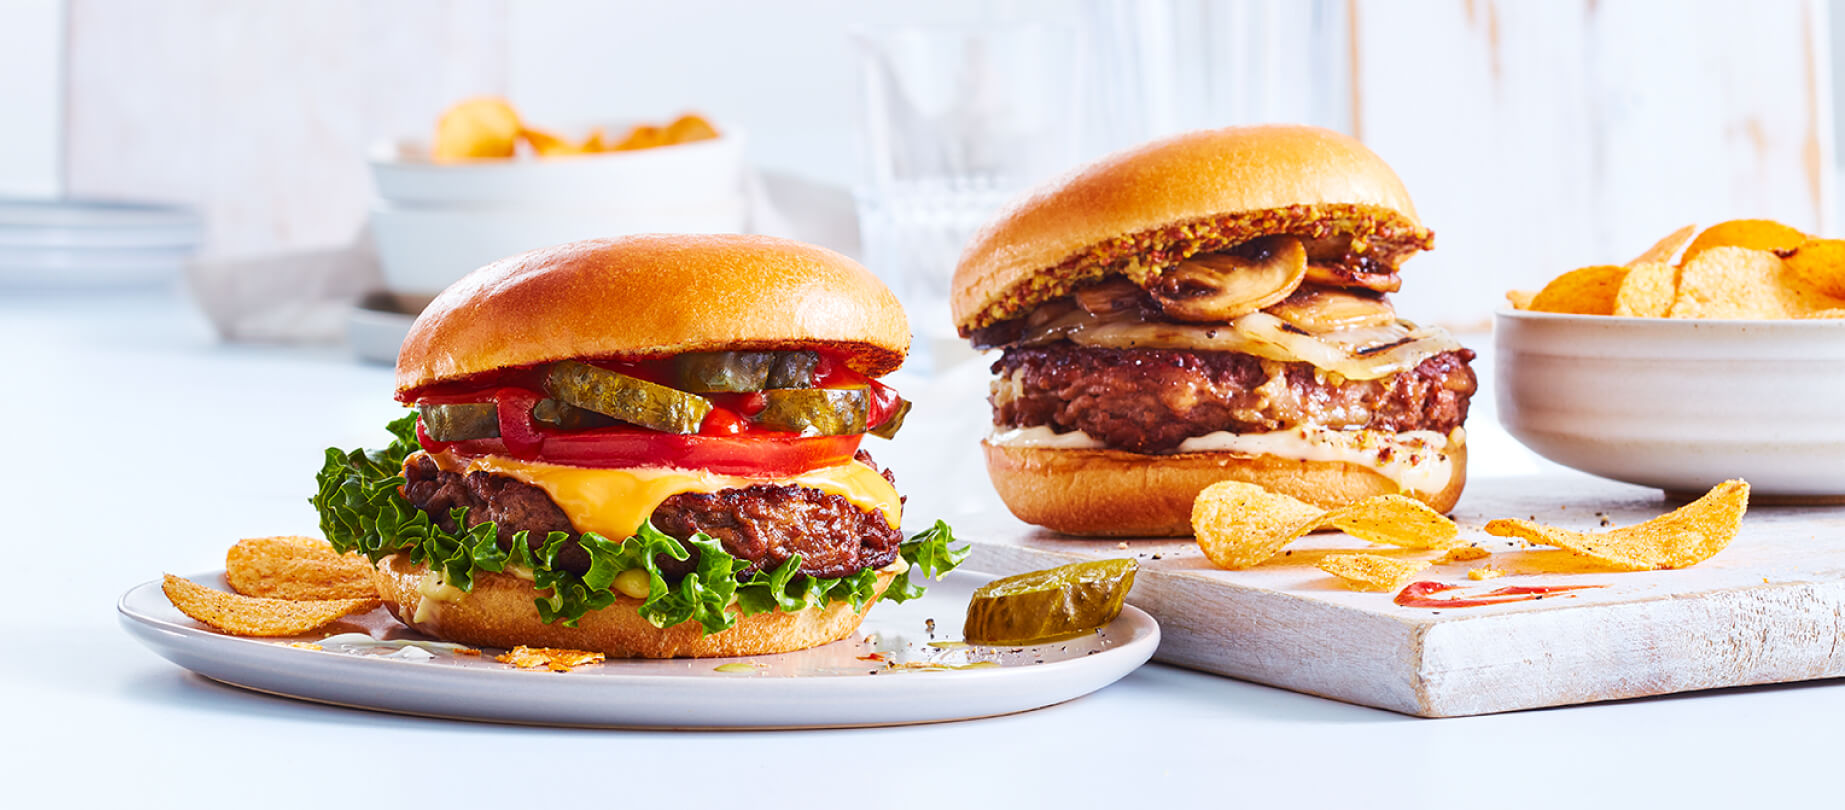 Classic Americana burger and Dutch-style bistro burger on a white background